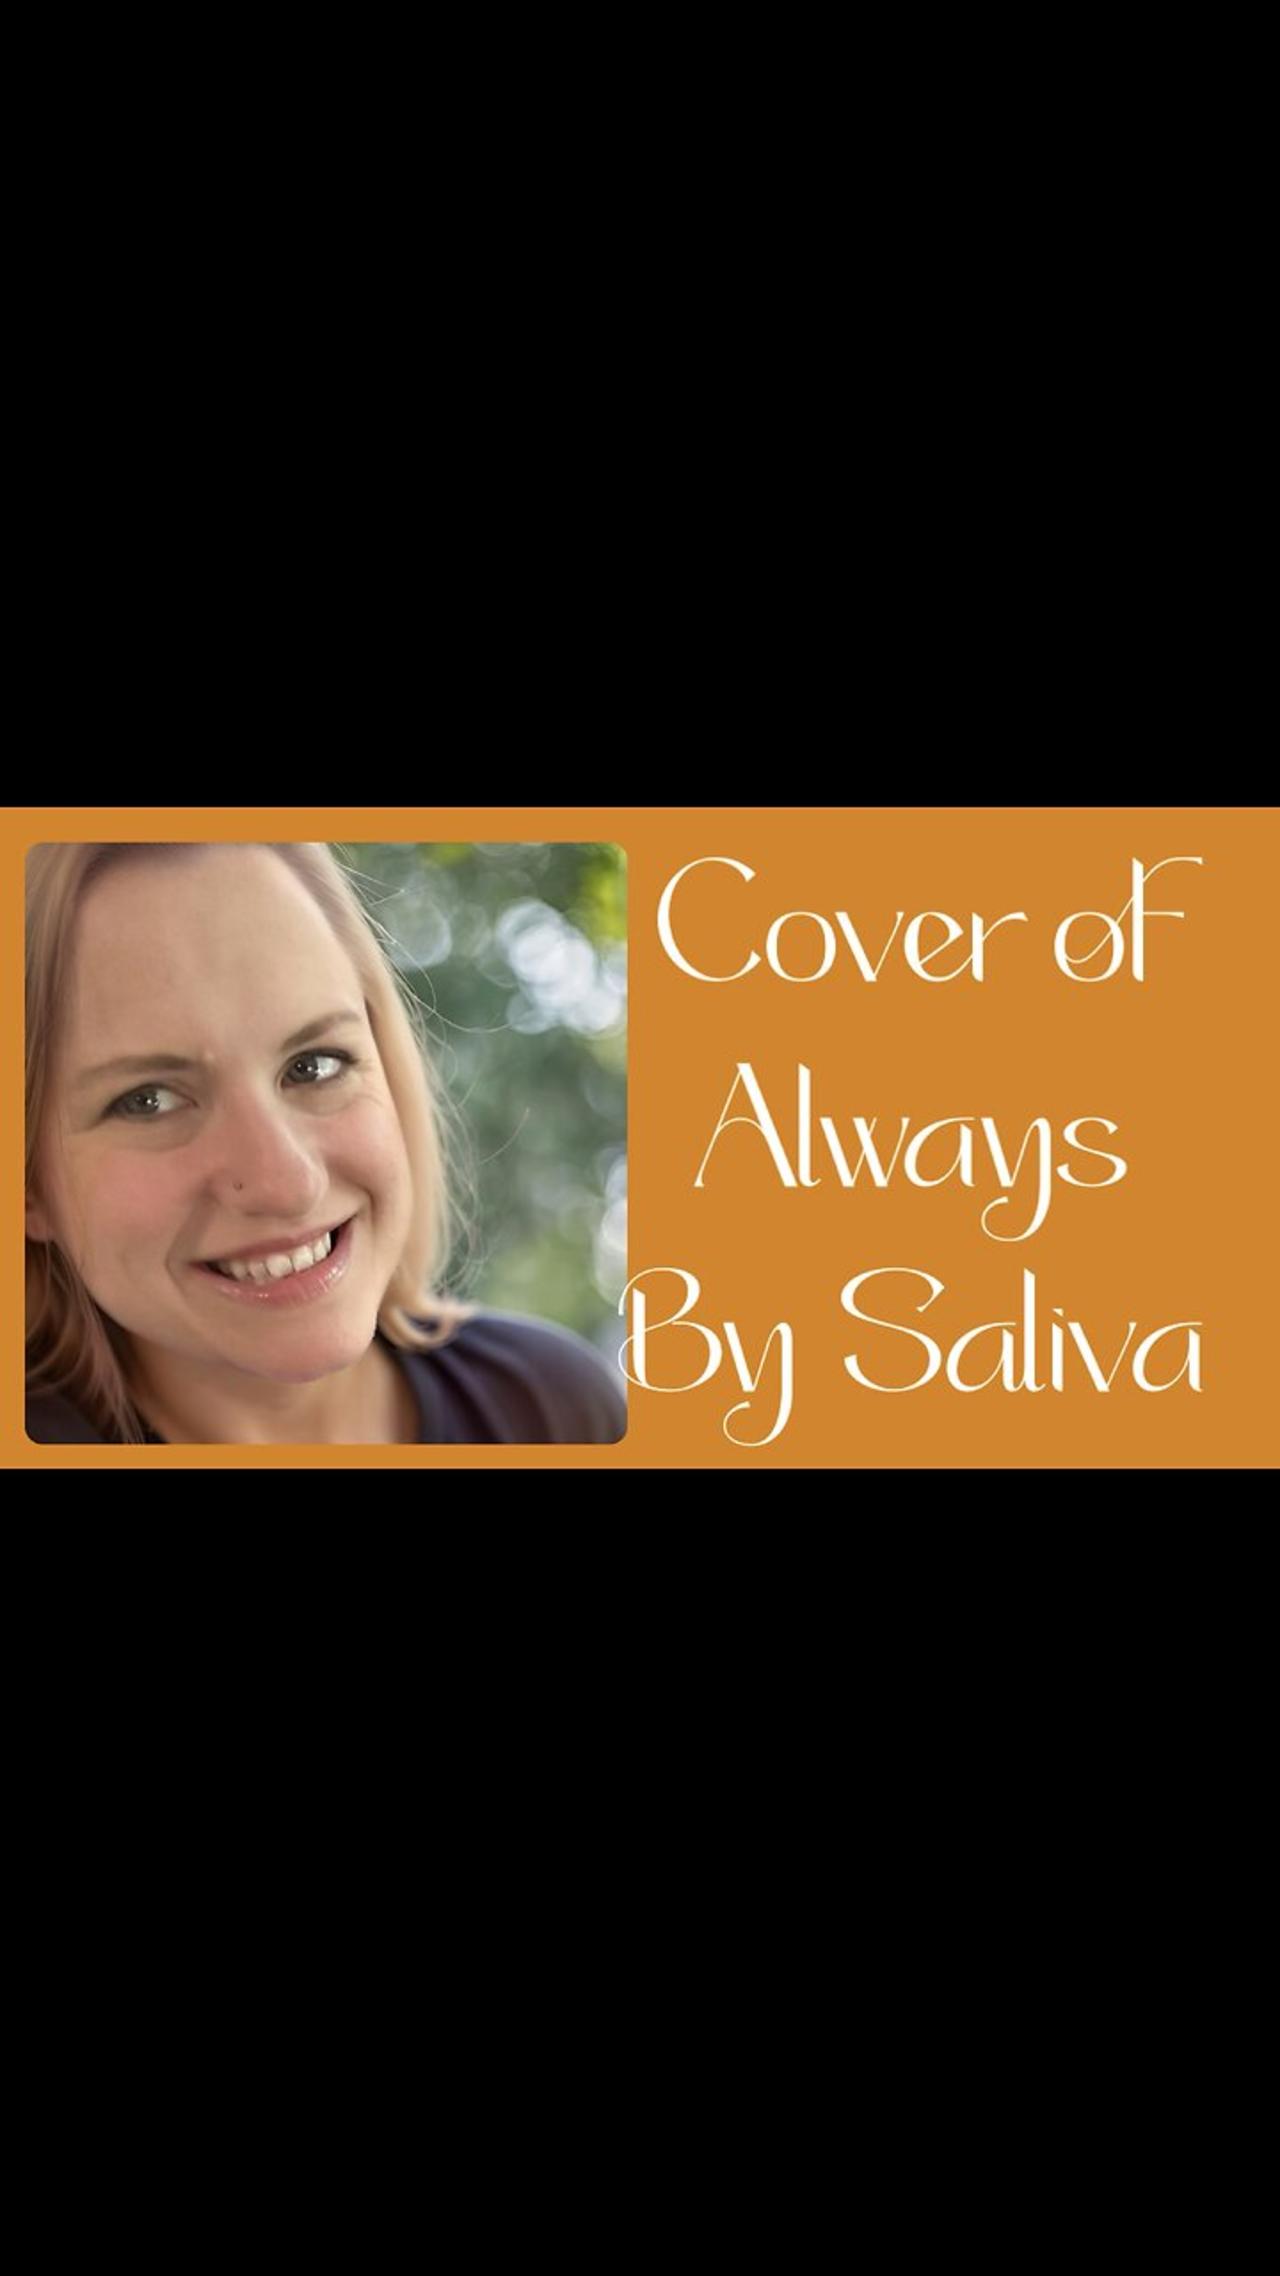 Cover of Always by Saliva